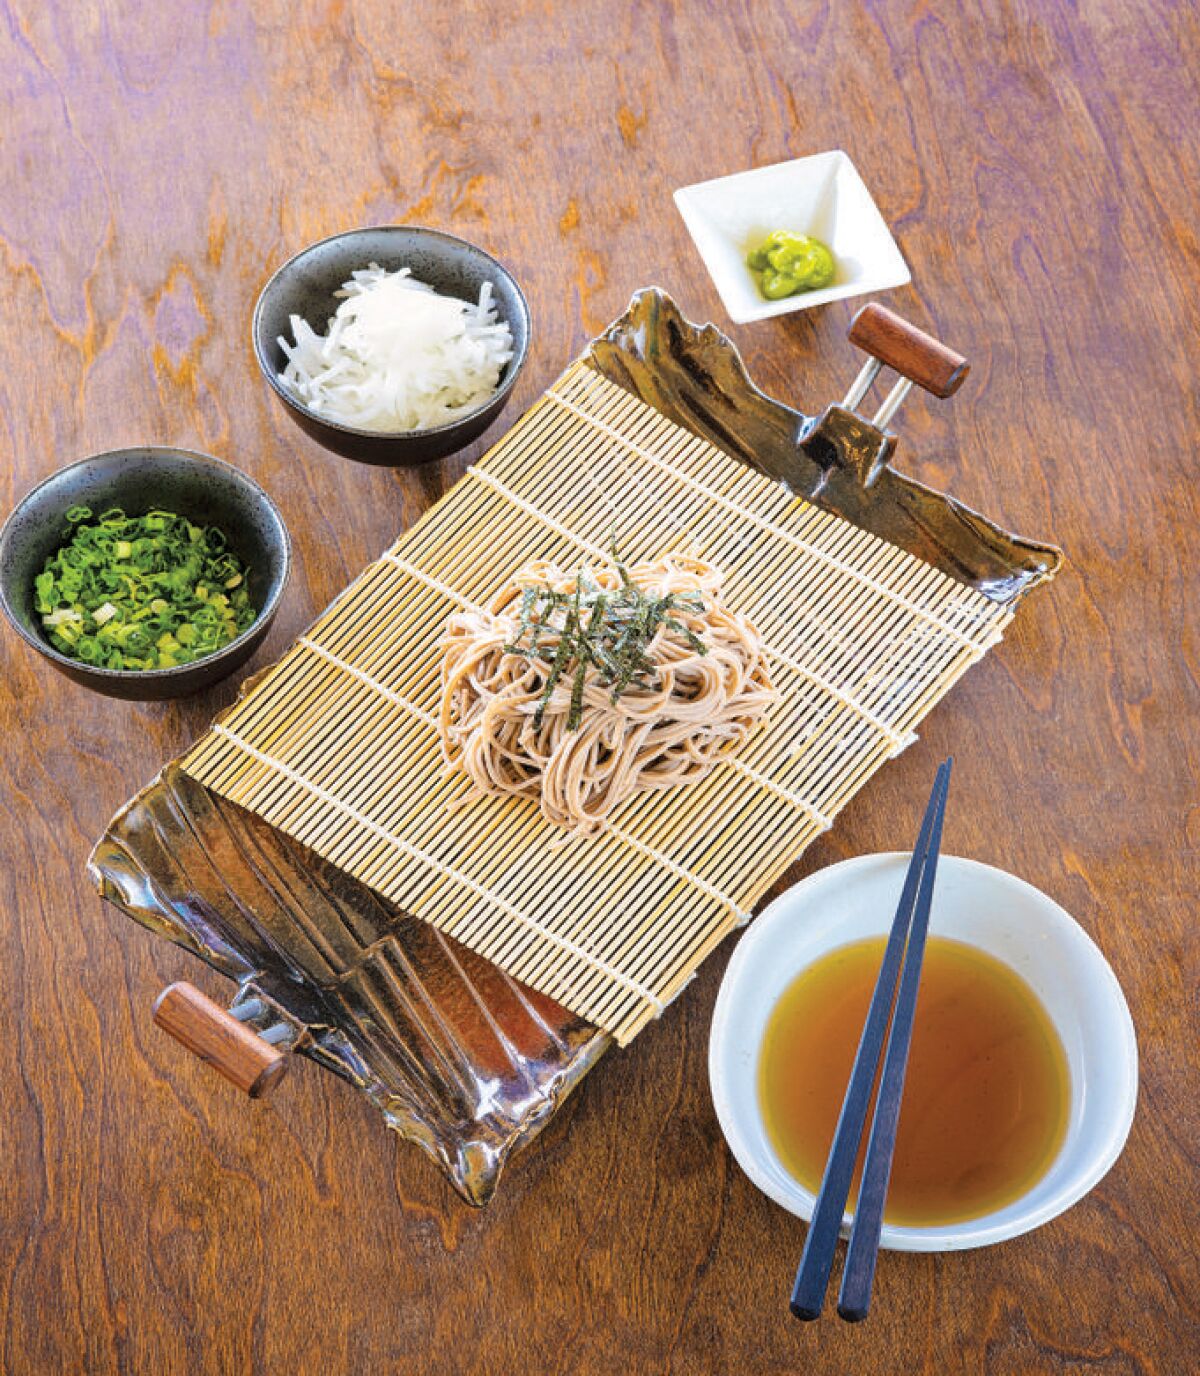 Cold soba noodles with dipping sauce and toppings are arranged on a table.